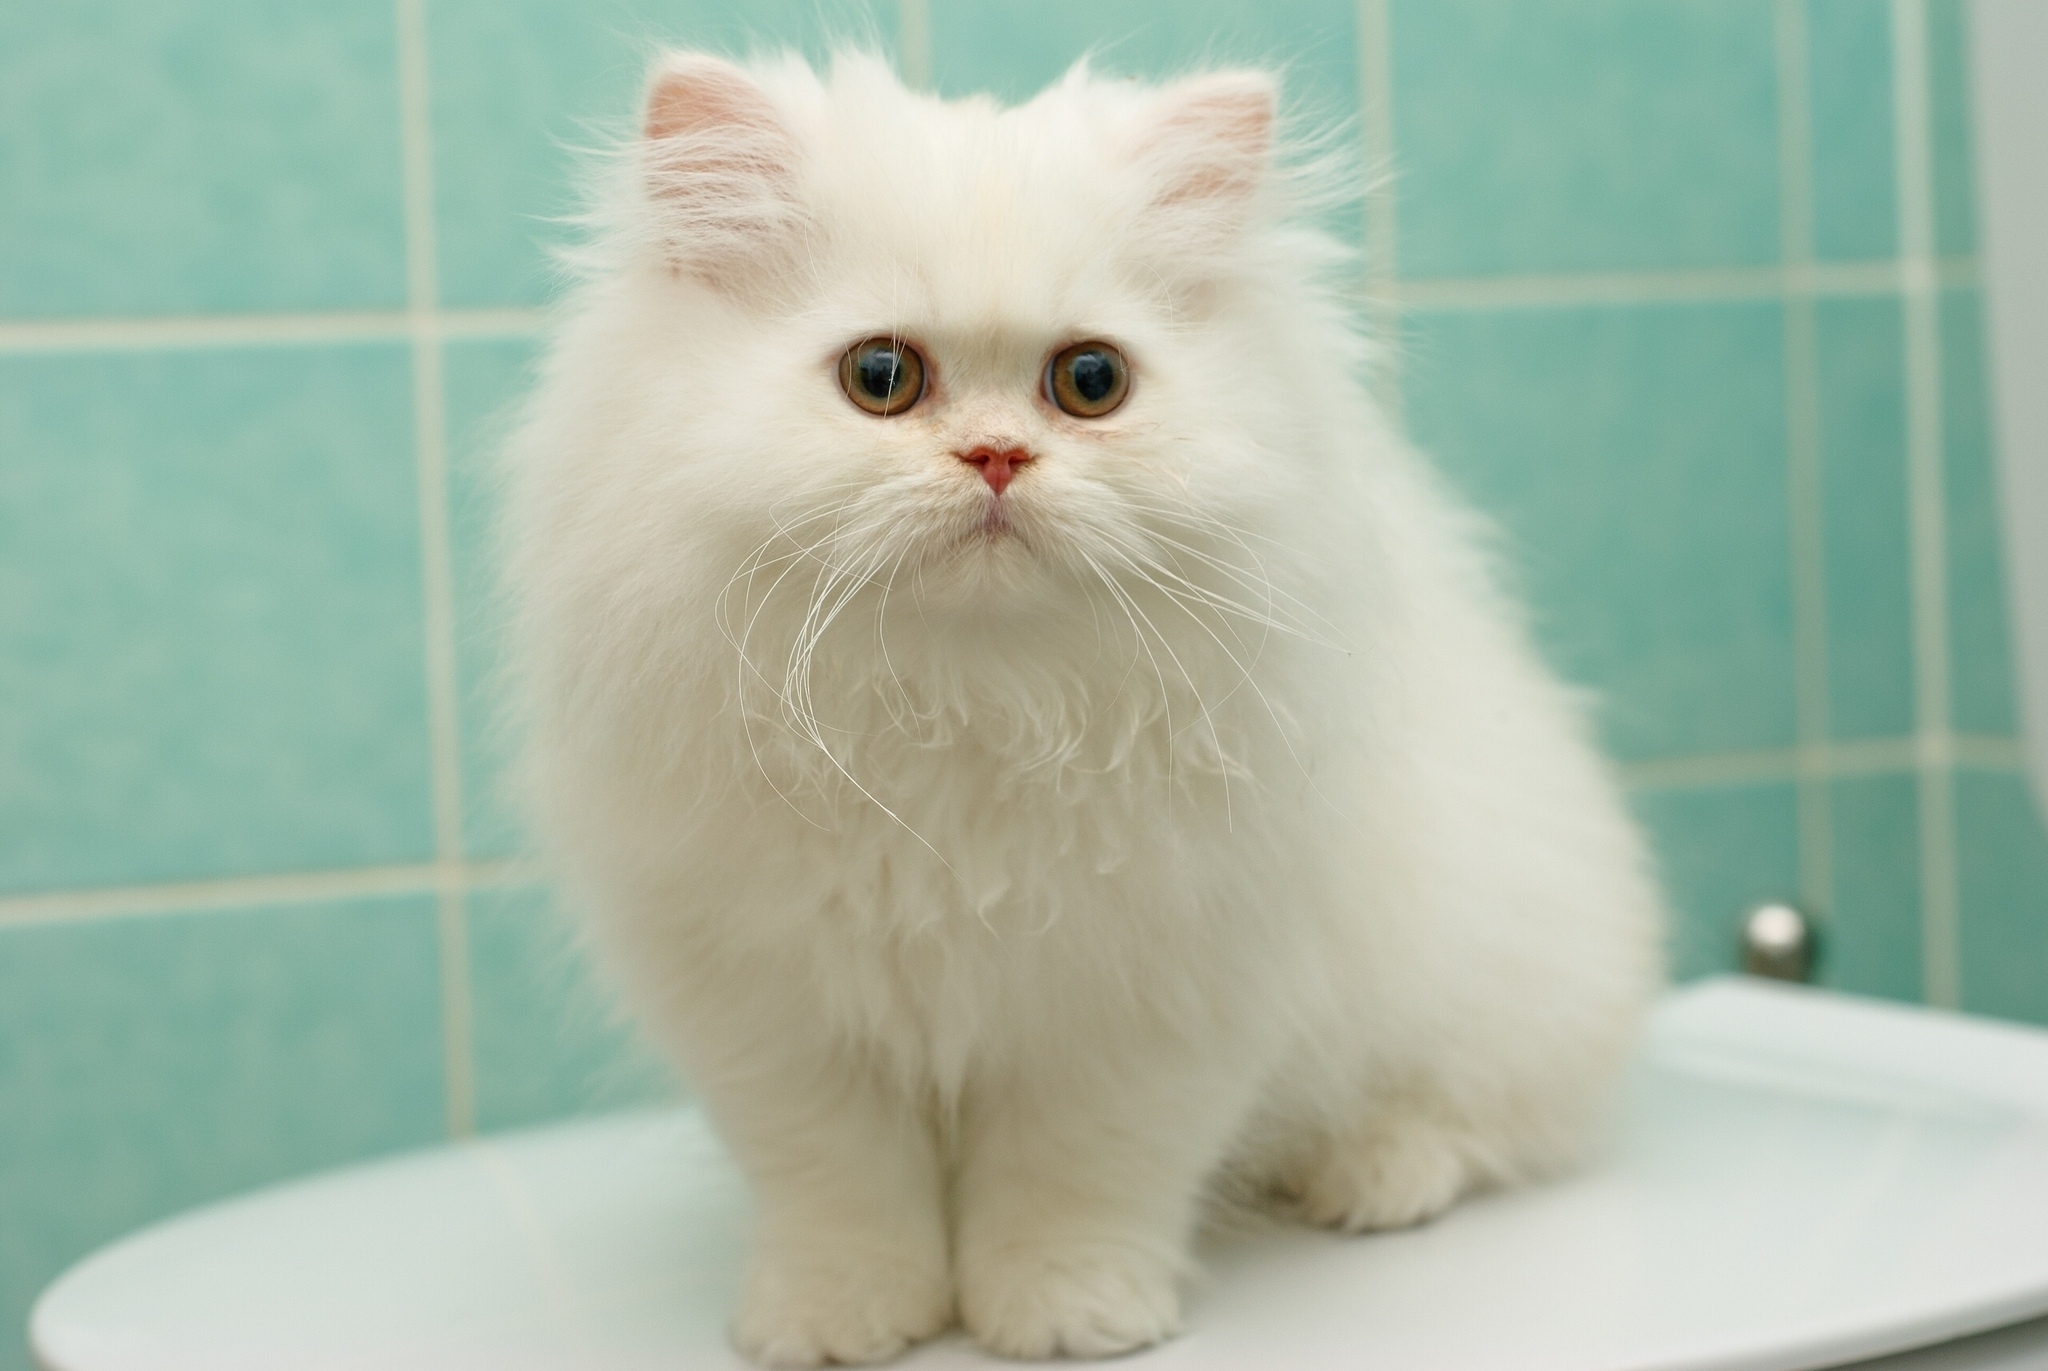 41 Very Cute Persian Kitten Pictures And Images